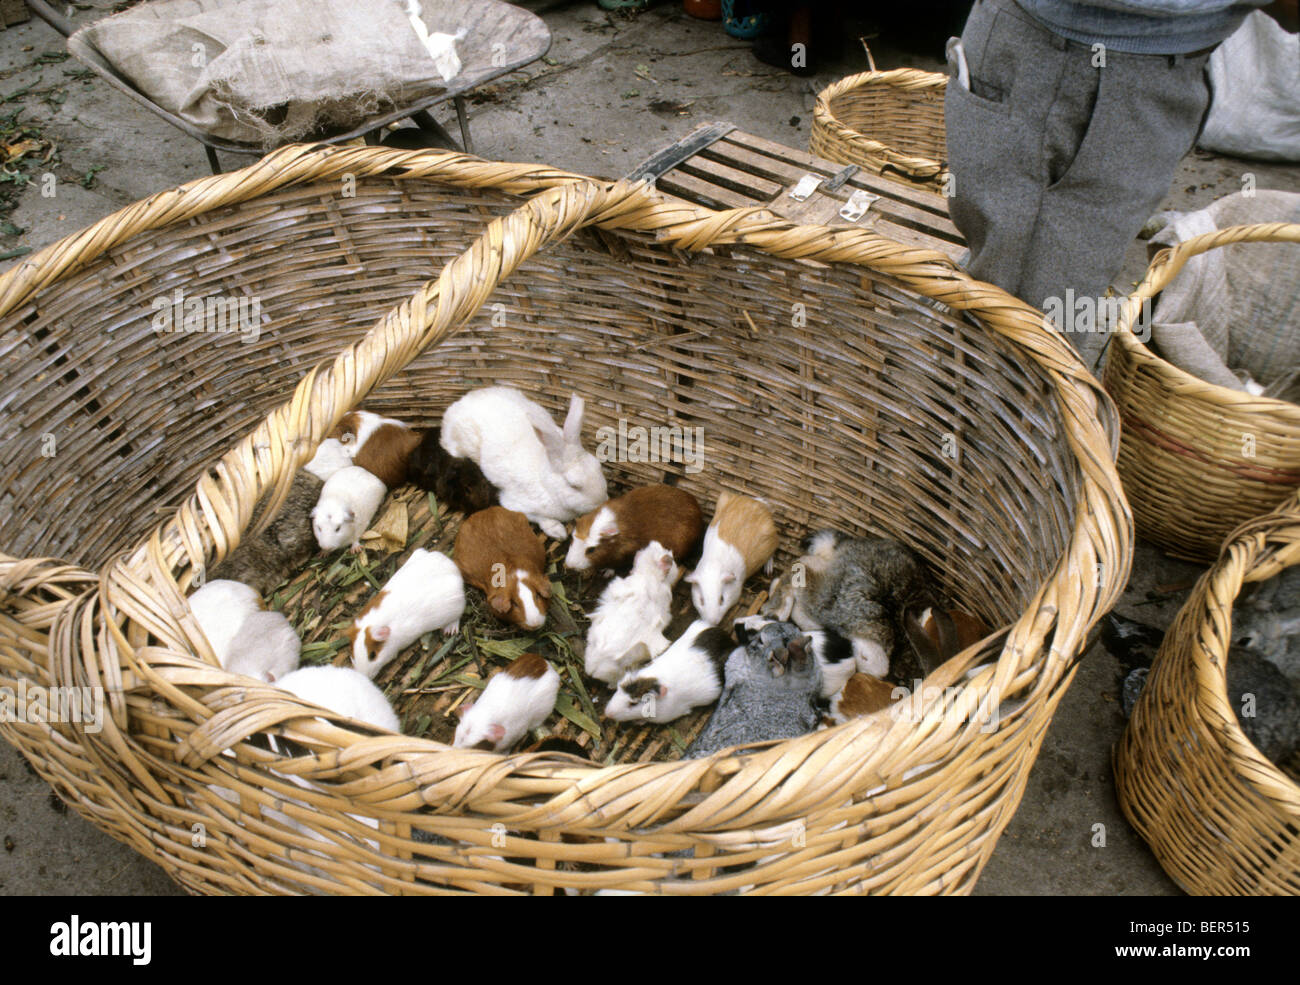 Looking down into huge wicker basket containing rabbits and guinea pigs on sale for meat.  Ecuador highlands local market. Stock Photo